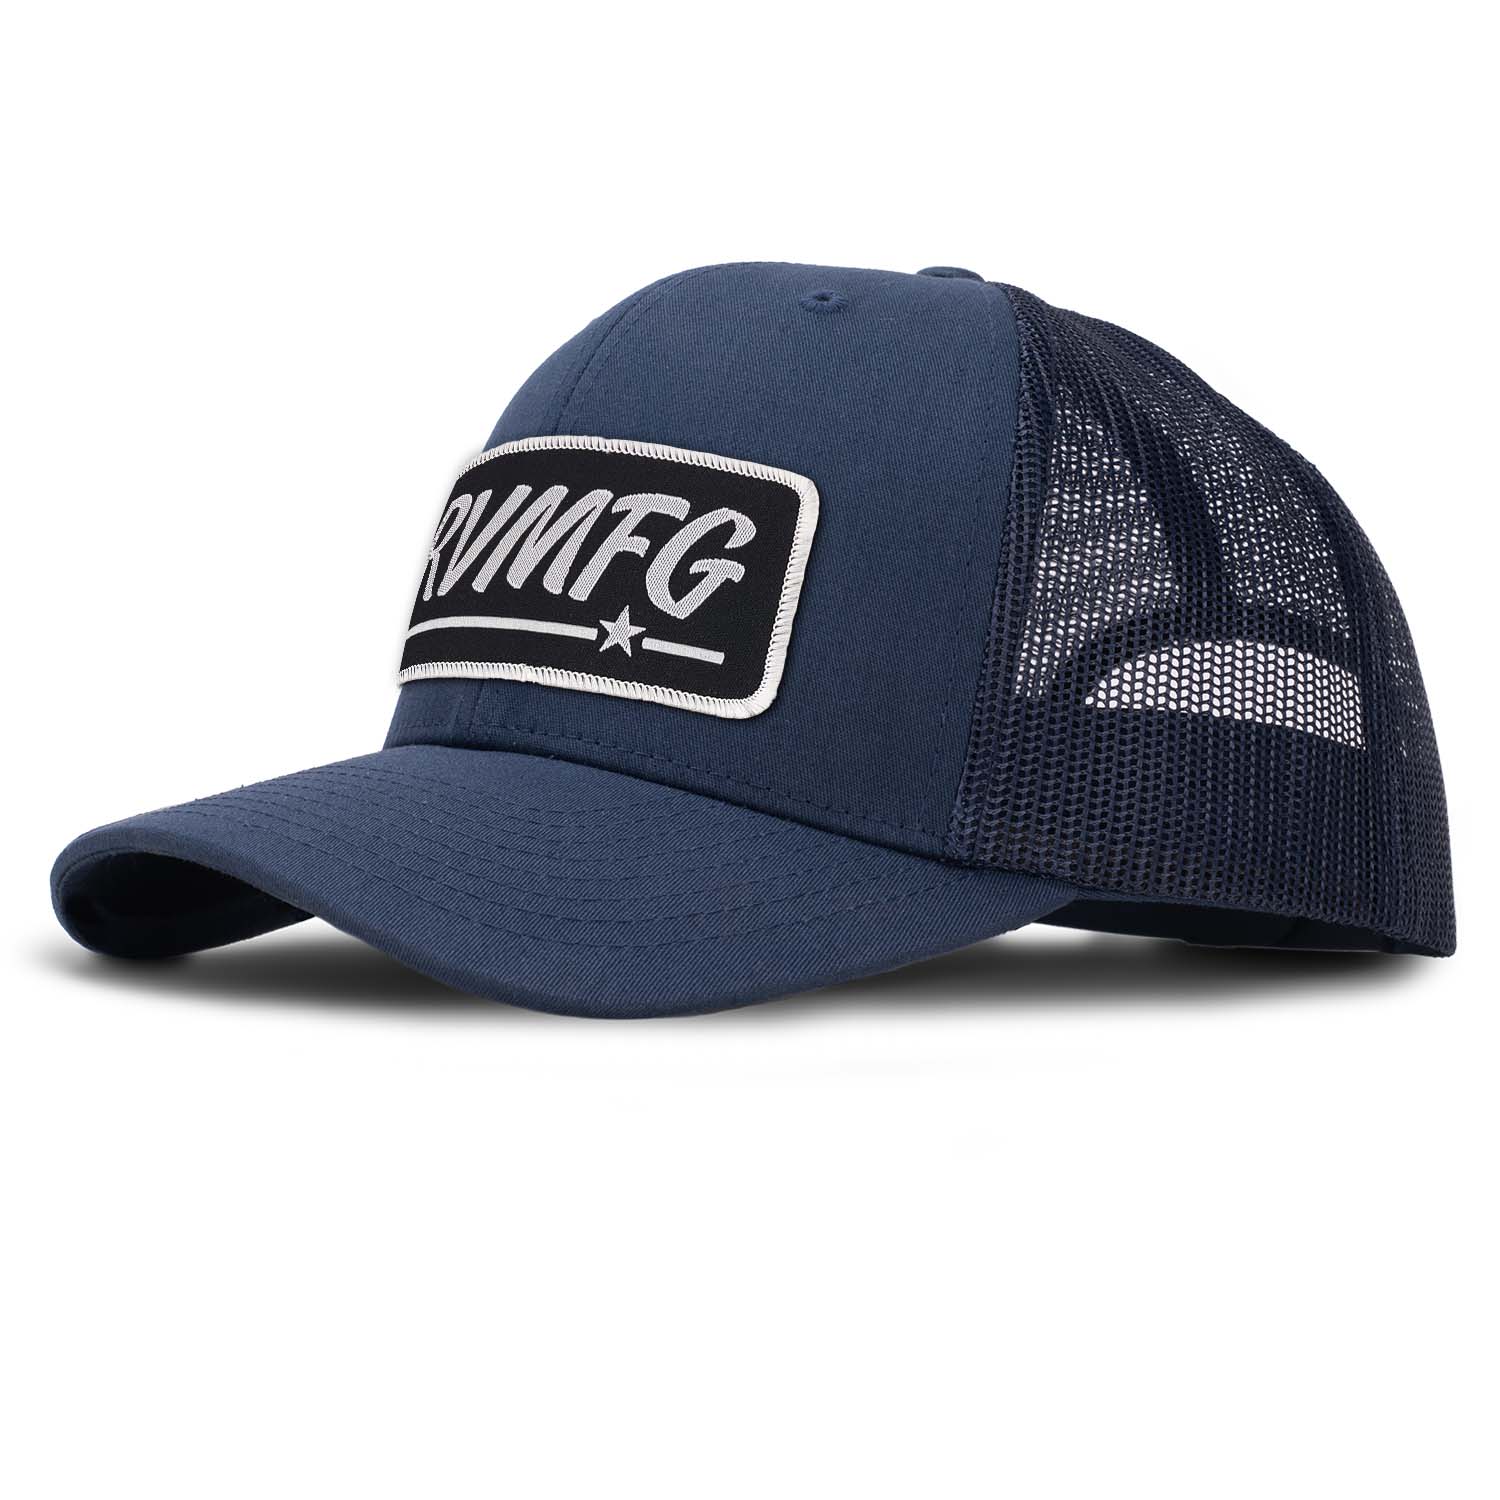 Revolution Mfg classic trucker hat in navy with navy mesh with a black woven RVMFG patch with white letters and a white border